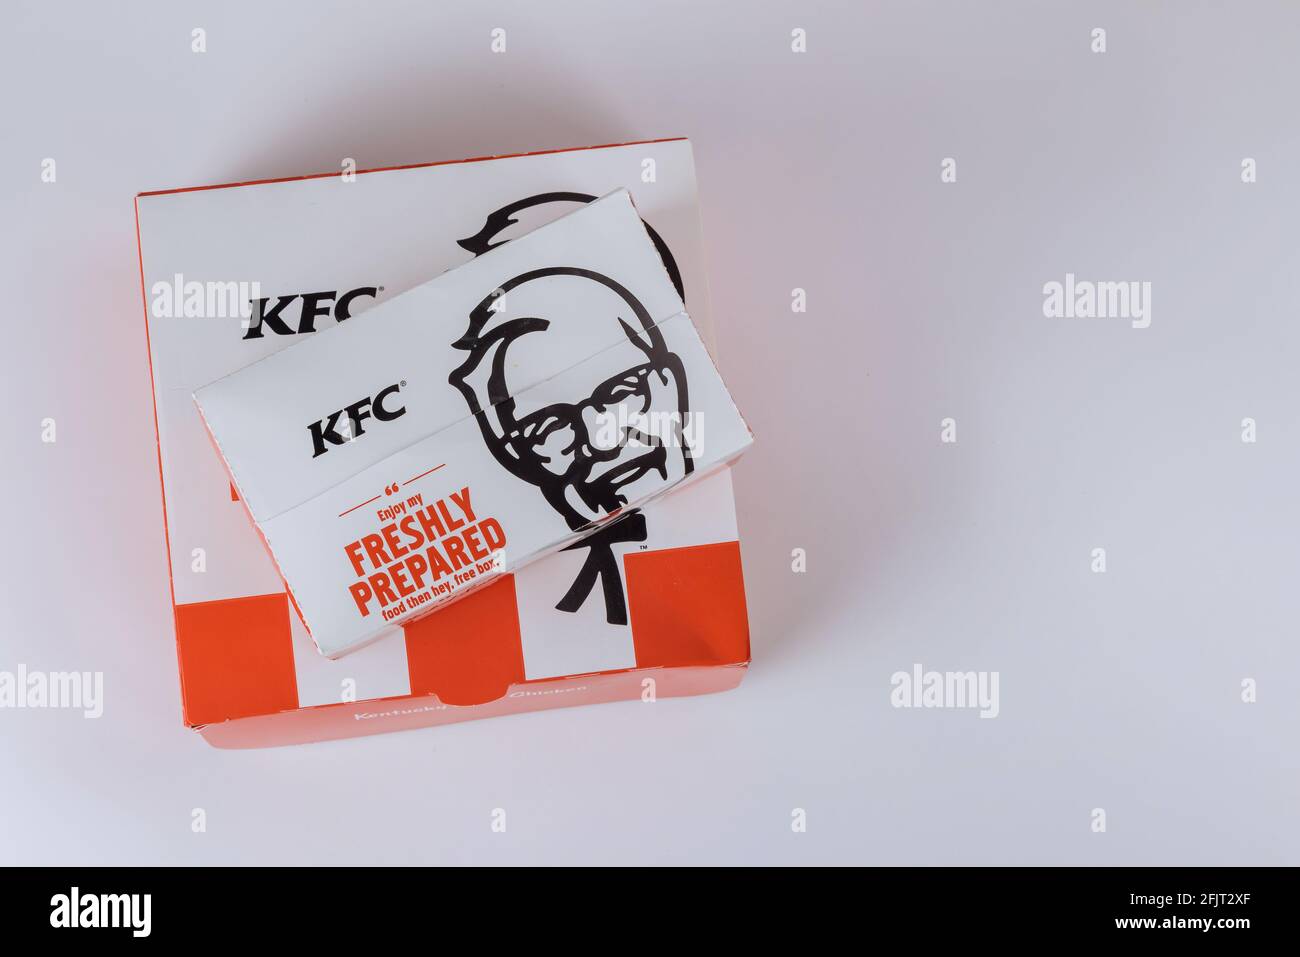 Restaurant Kentucky Fried Chicken KFC is a large restaurant chain set at fast food Stock Photo